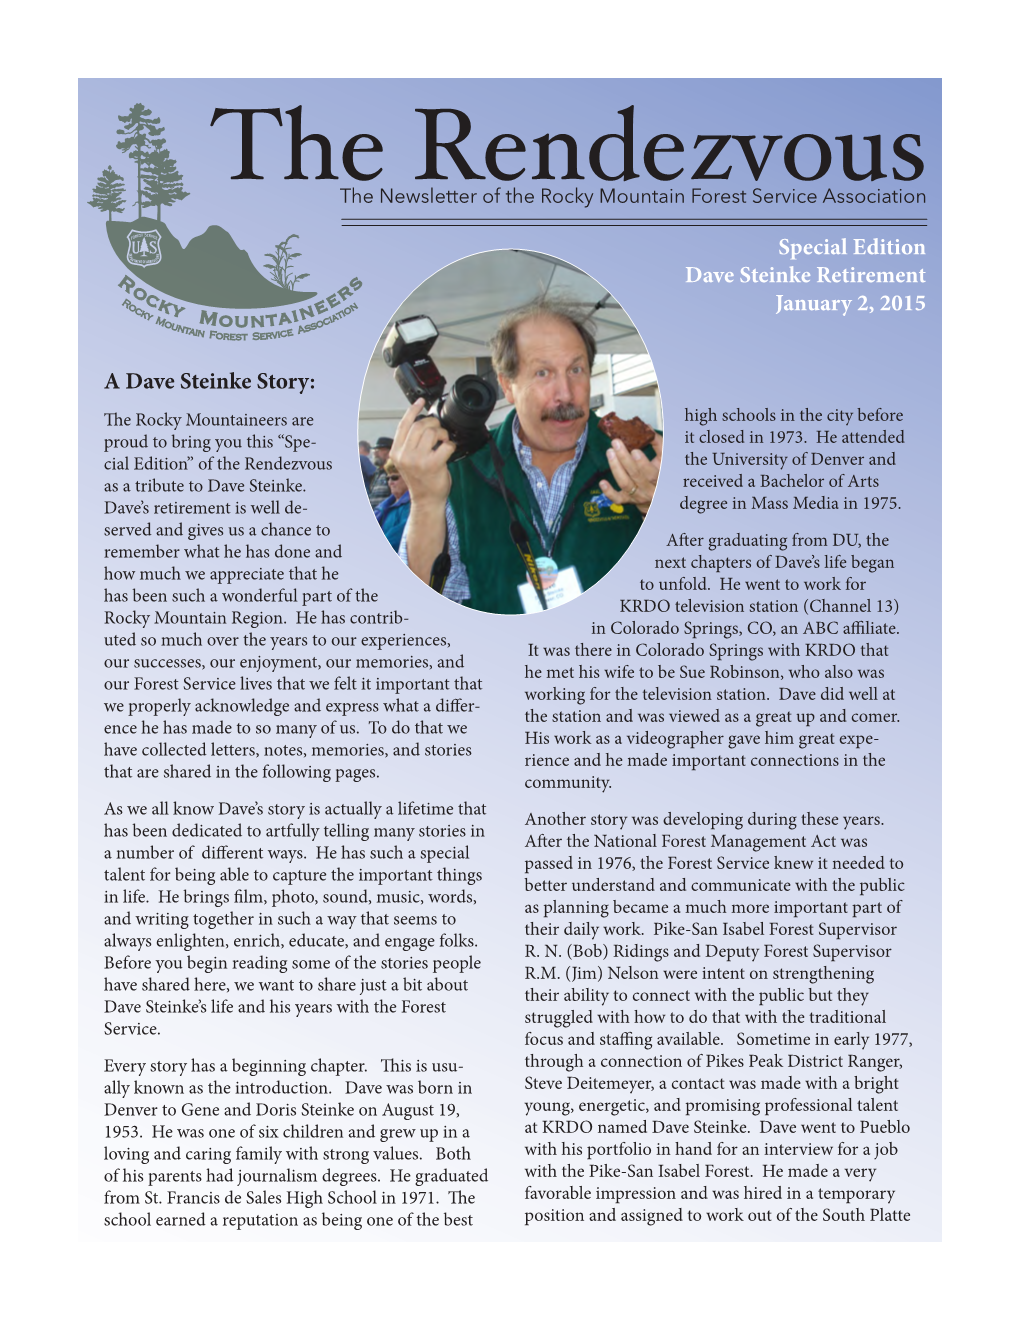 The Rendezvous the University of Denver and As a Tribute to Dave Steinke